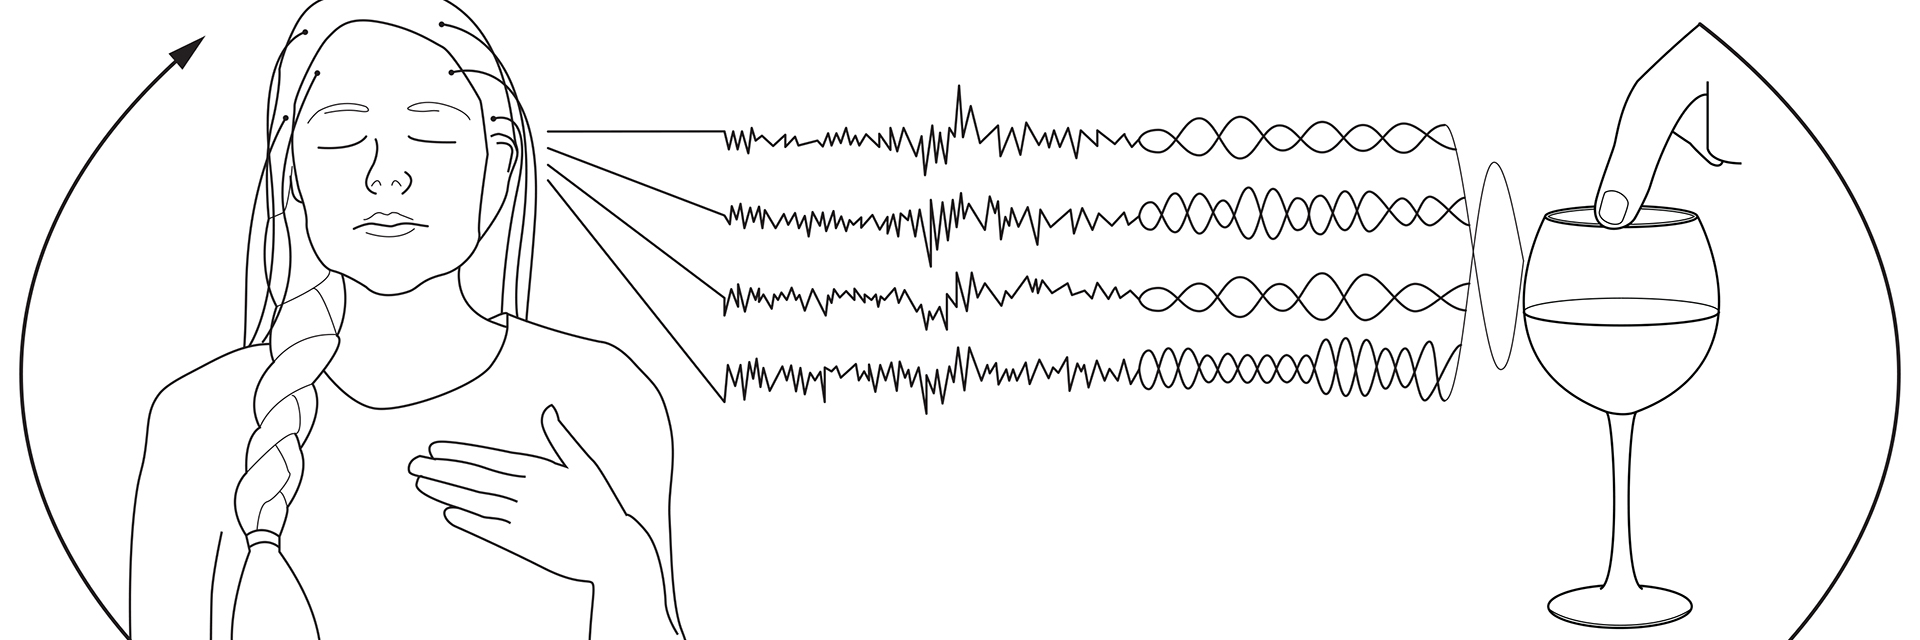 An illustration to describe brain-body music performance.